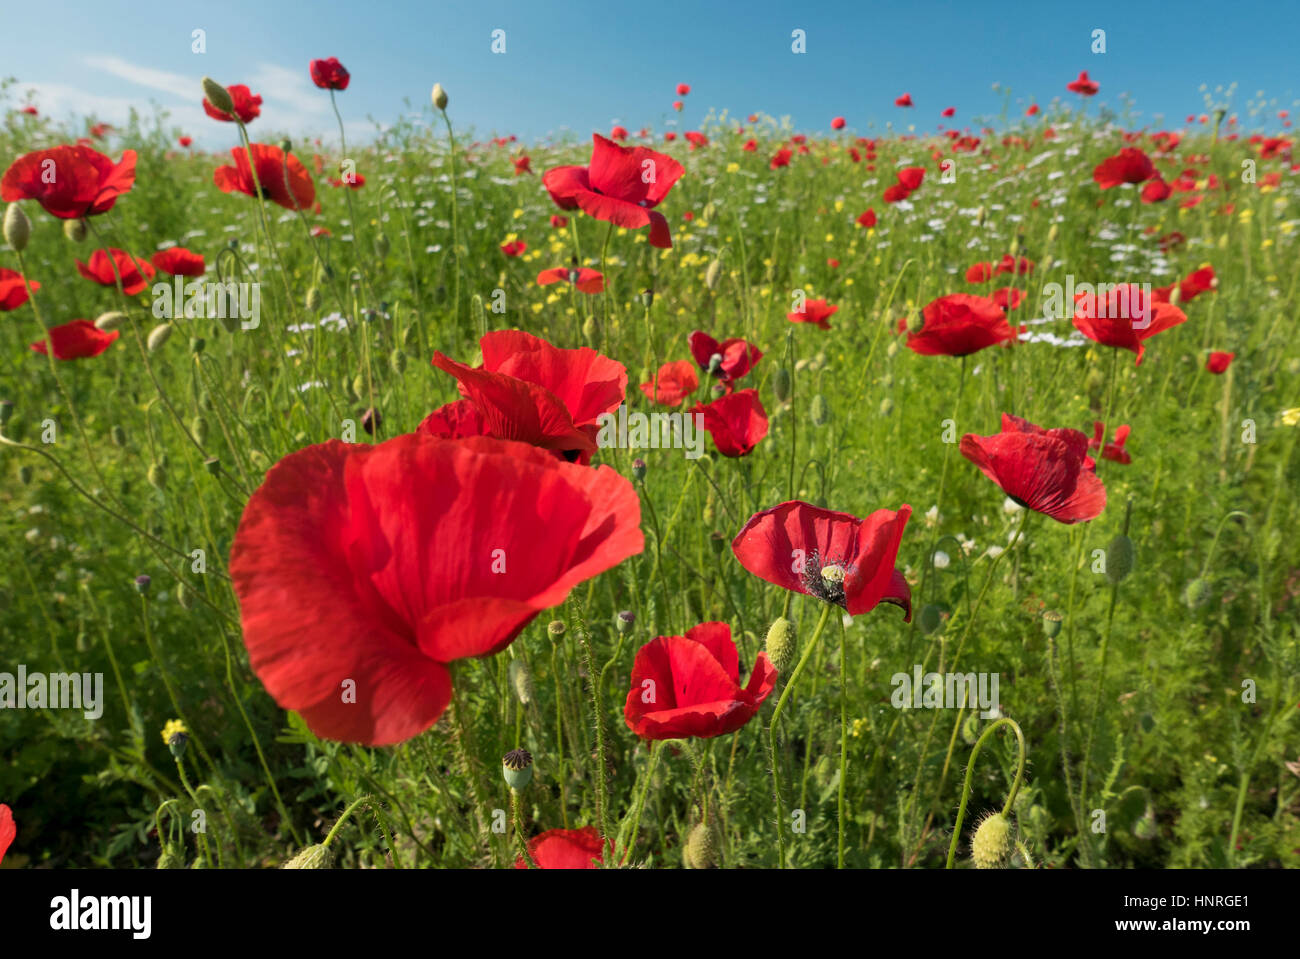 Brightly coloured poppies and other wild flowers in a meadow on a sunny day with blue sky in spring. Stock Photo